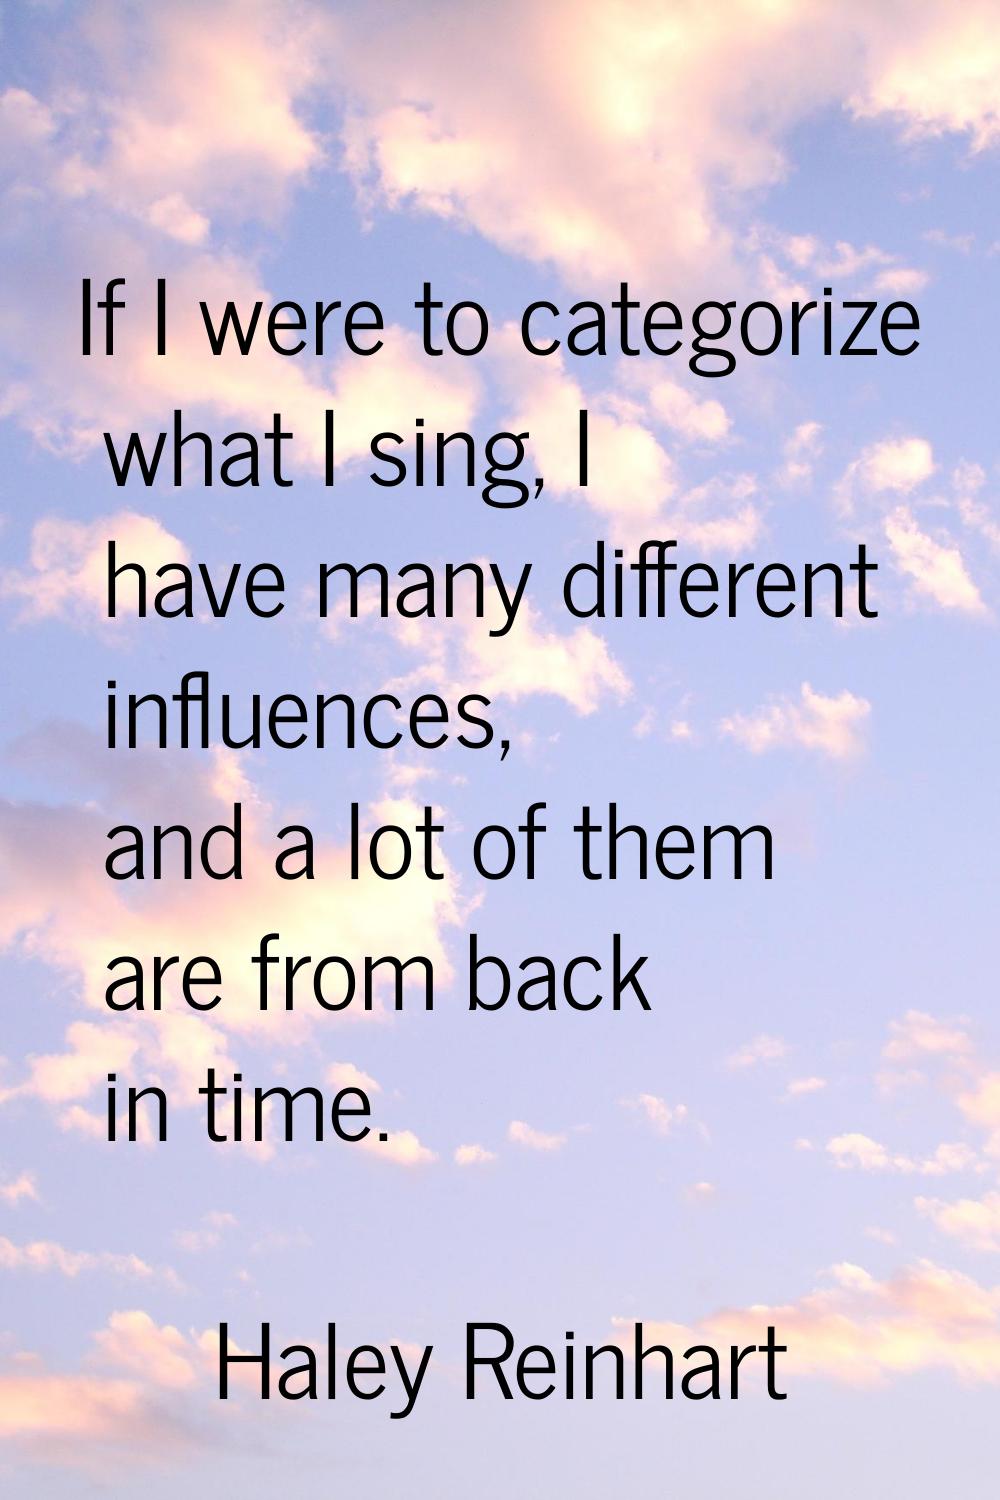 If I were to categorize what I sing, I have many different influences, and a lot of them are from b